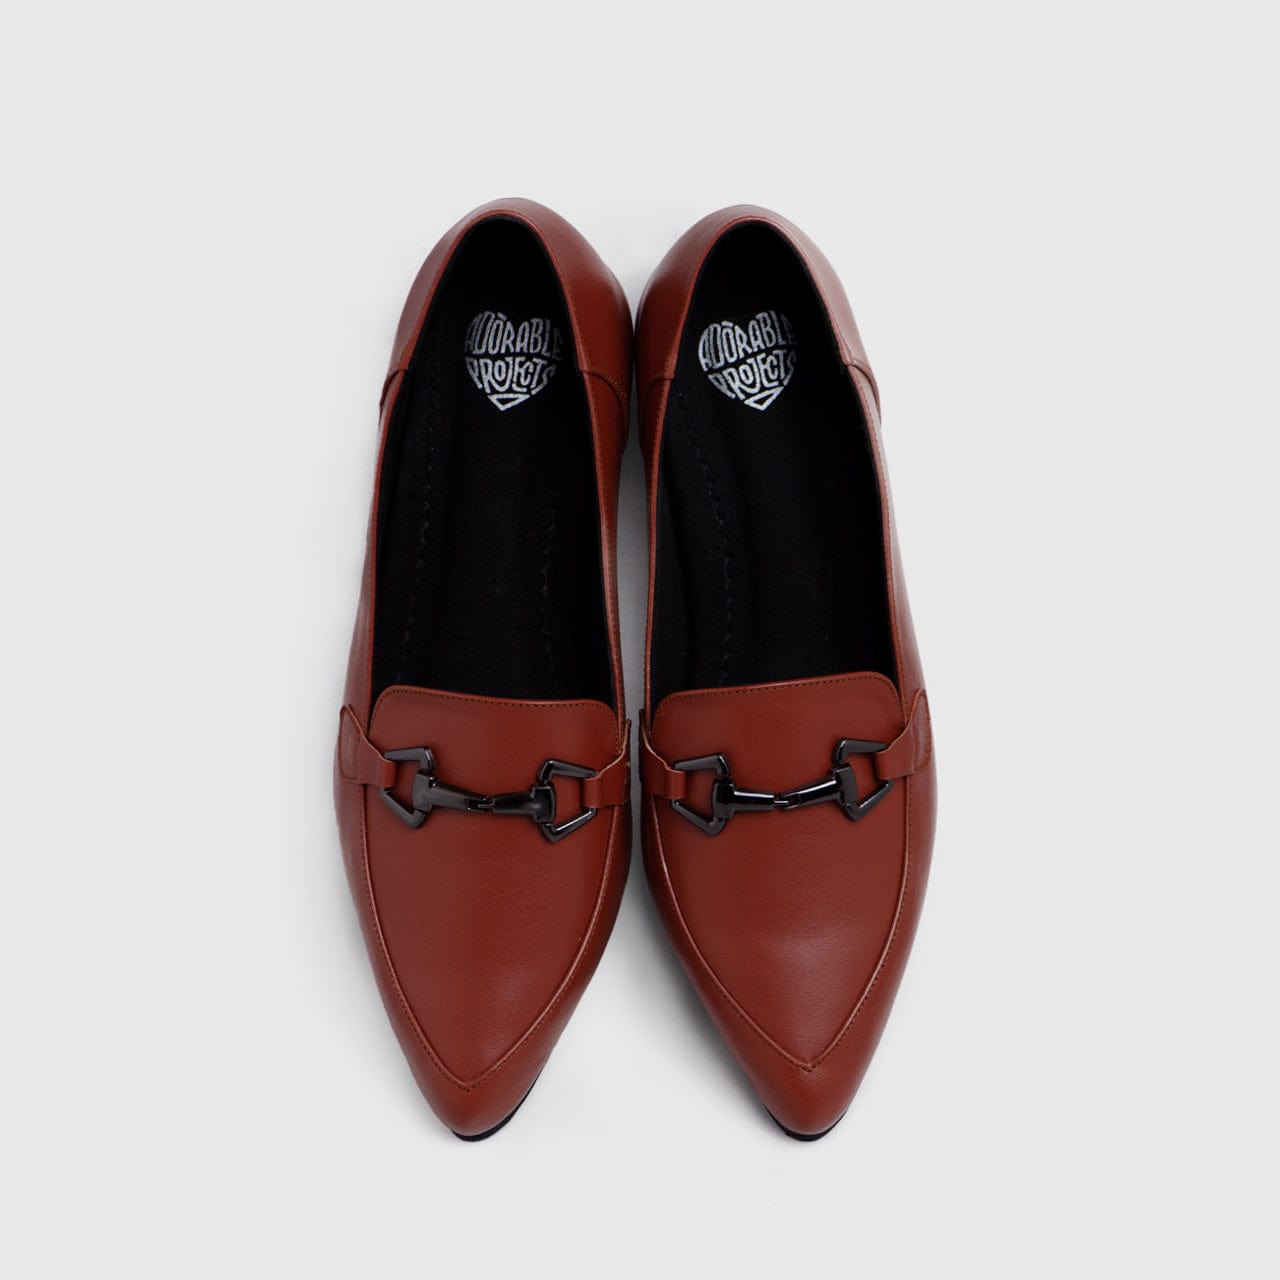 Adorable Projects Official Adorableprojects - Mulligan Heels Genuine Leather Terracotta